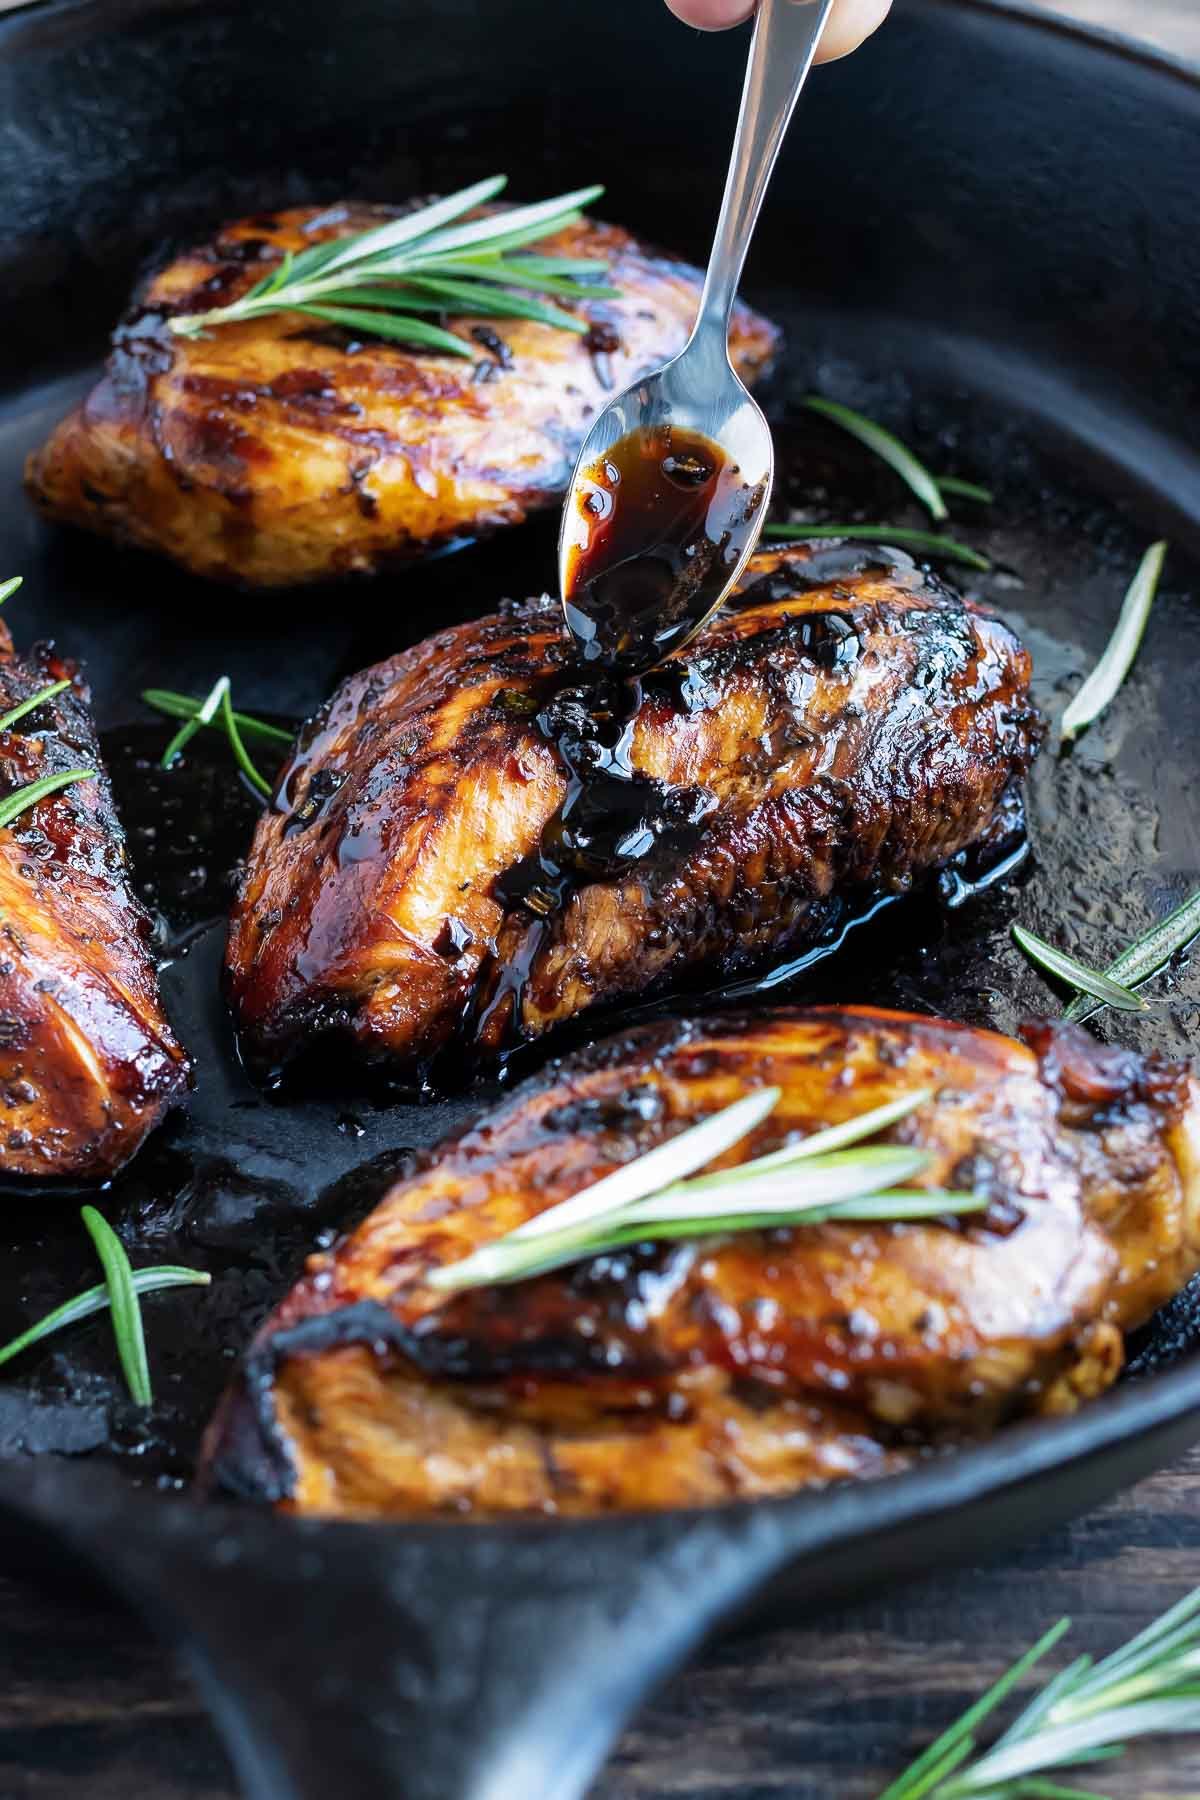 Balsamic glazed being poured over chicken breasts in a cast-iron skillet.